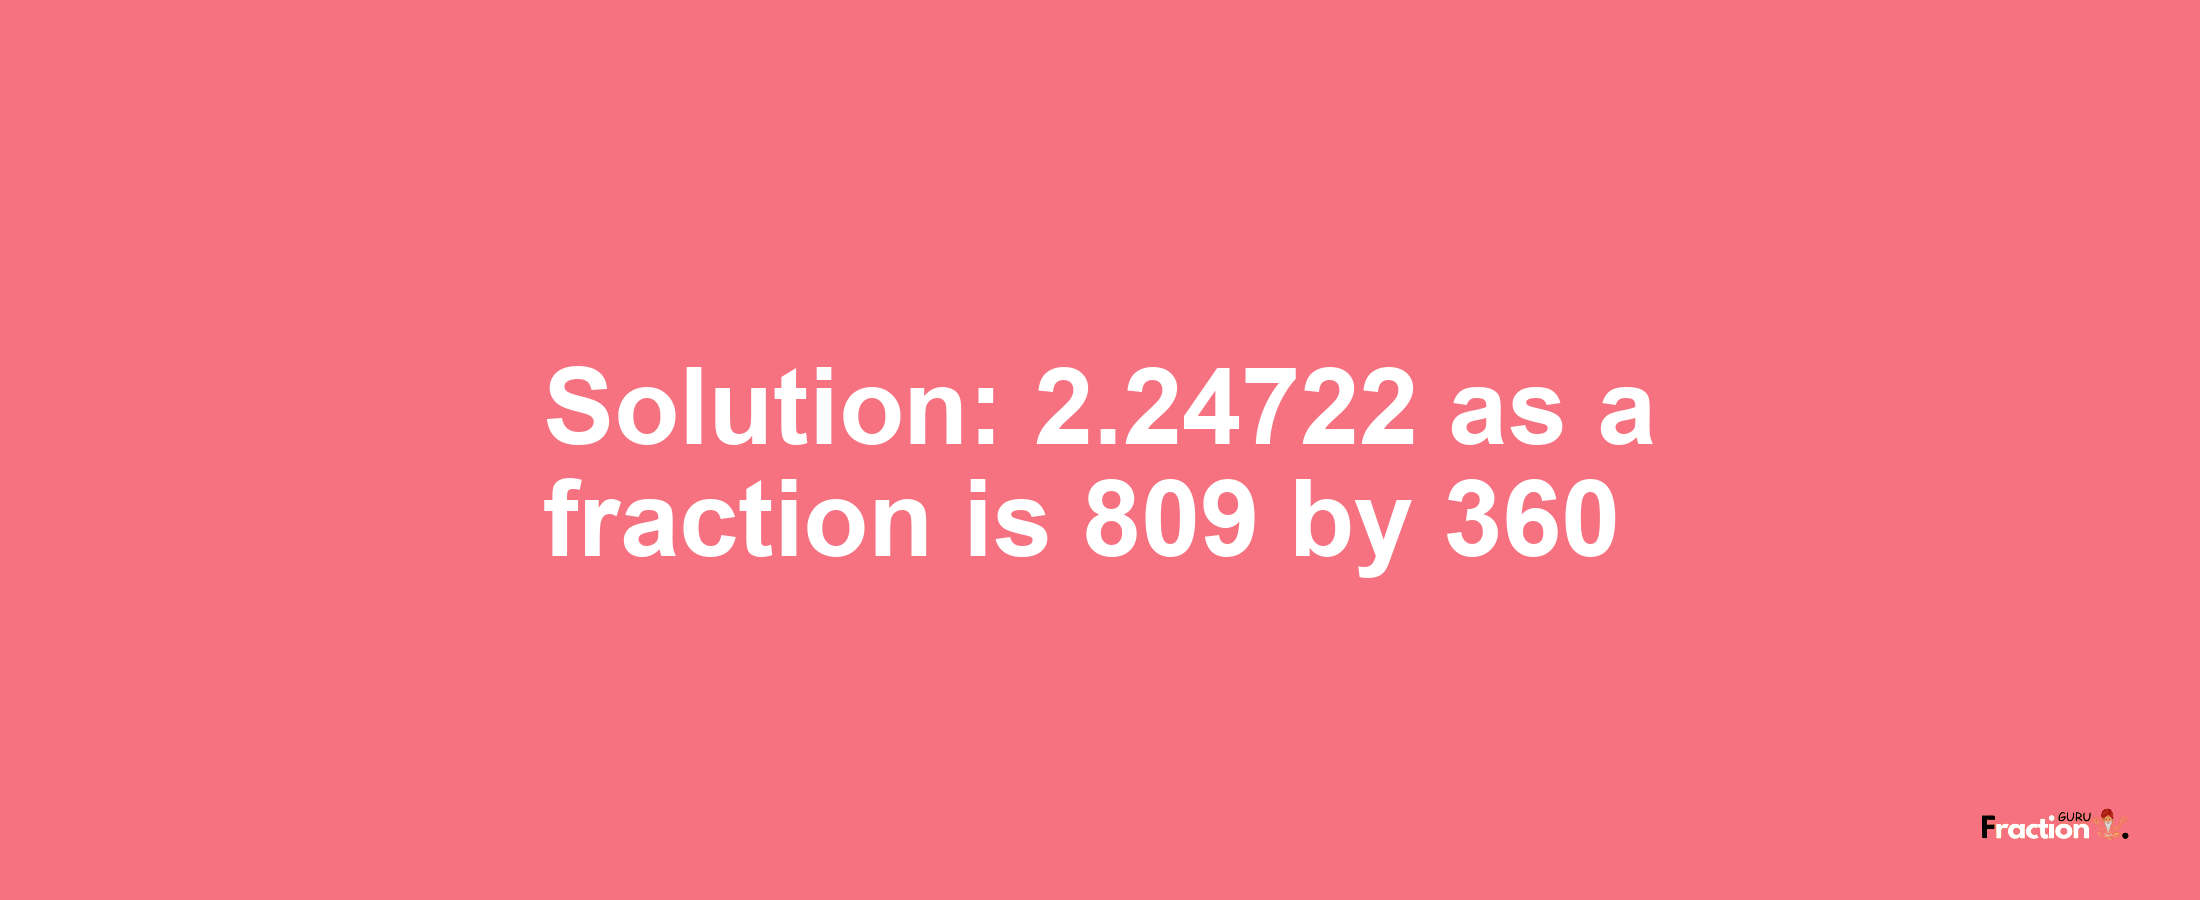 Solution:2.24722 as a fraction is 809/360